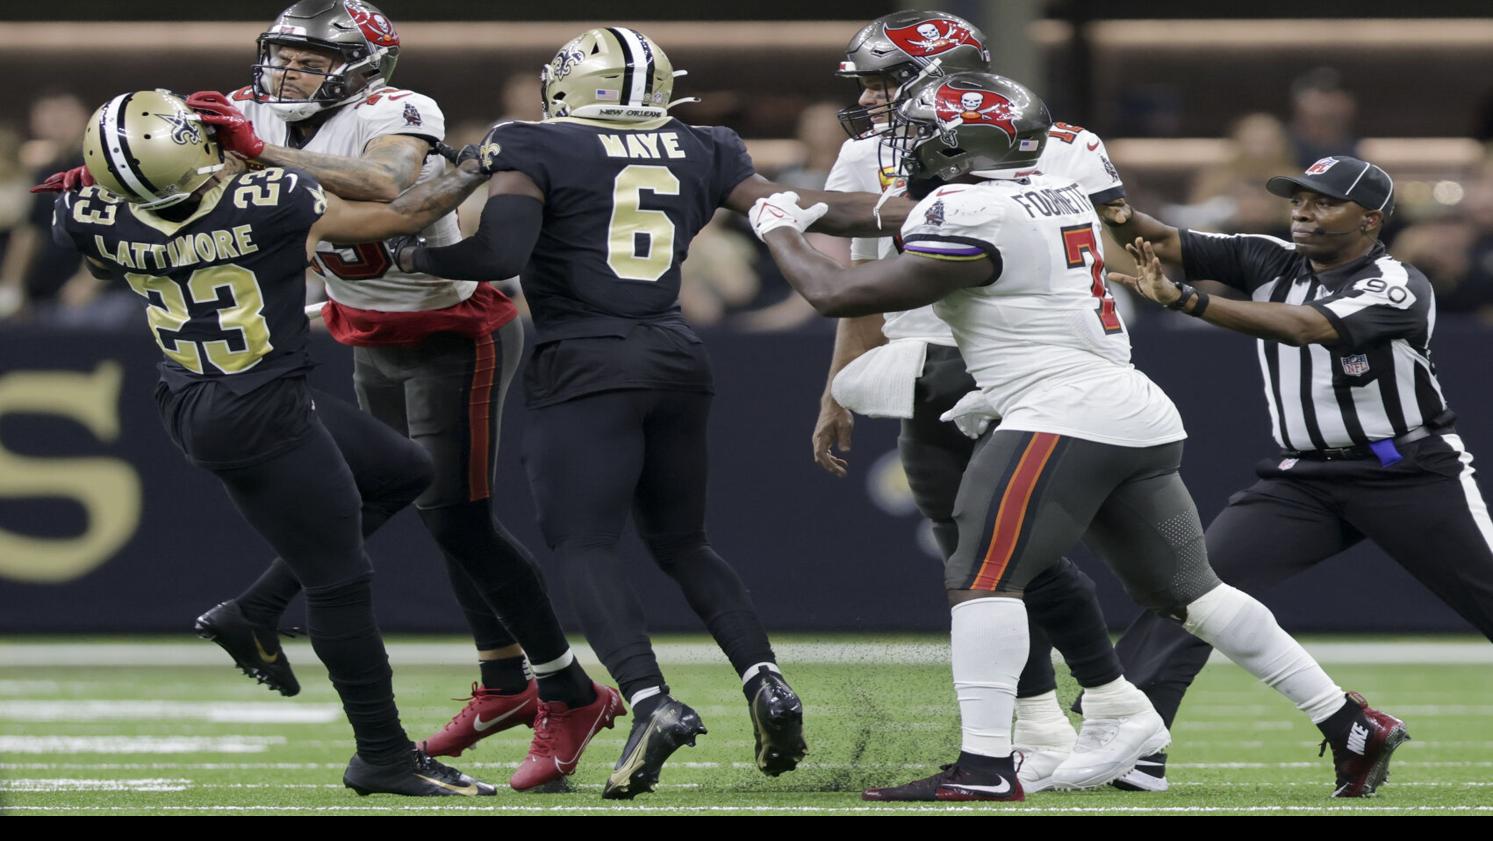 Buccaneers vs Saints Brawl - Lattimore and Mike Evans Ejected